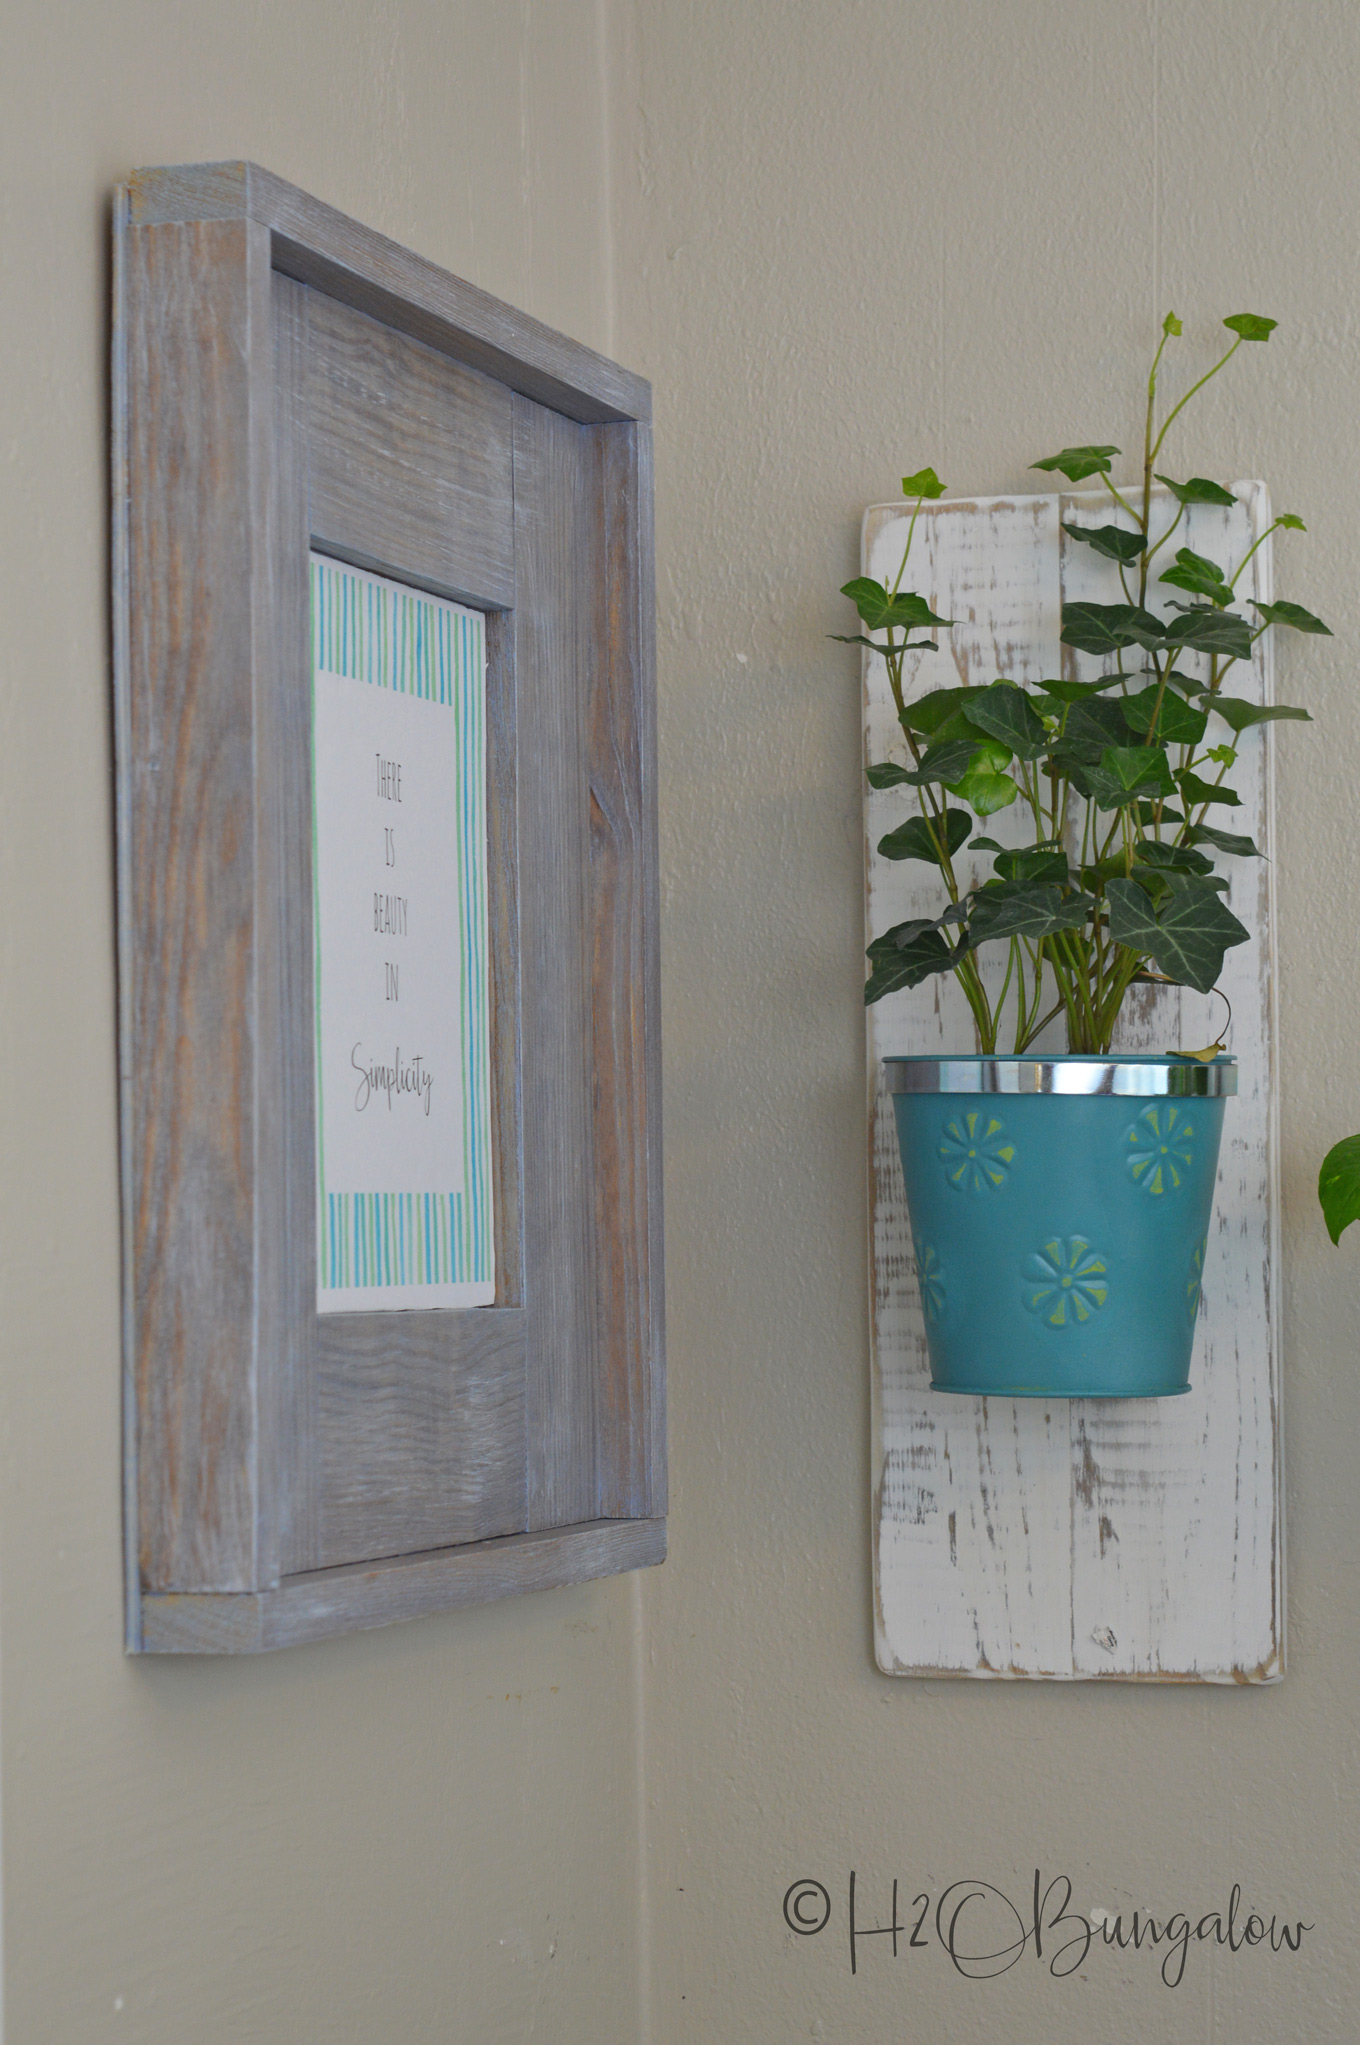 Easy to follow tutorial and video on how to build an easy DIY rustic picture frame to hang on the wall. Make a DIY frame to hold photos, art and printables. Change the finish for a beachy or modern farmhouse frame style. Make several sized wood frames and stack them in a vignette for a great look.